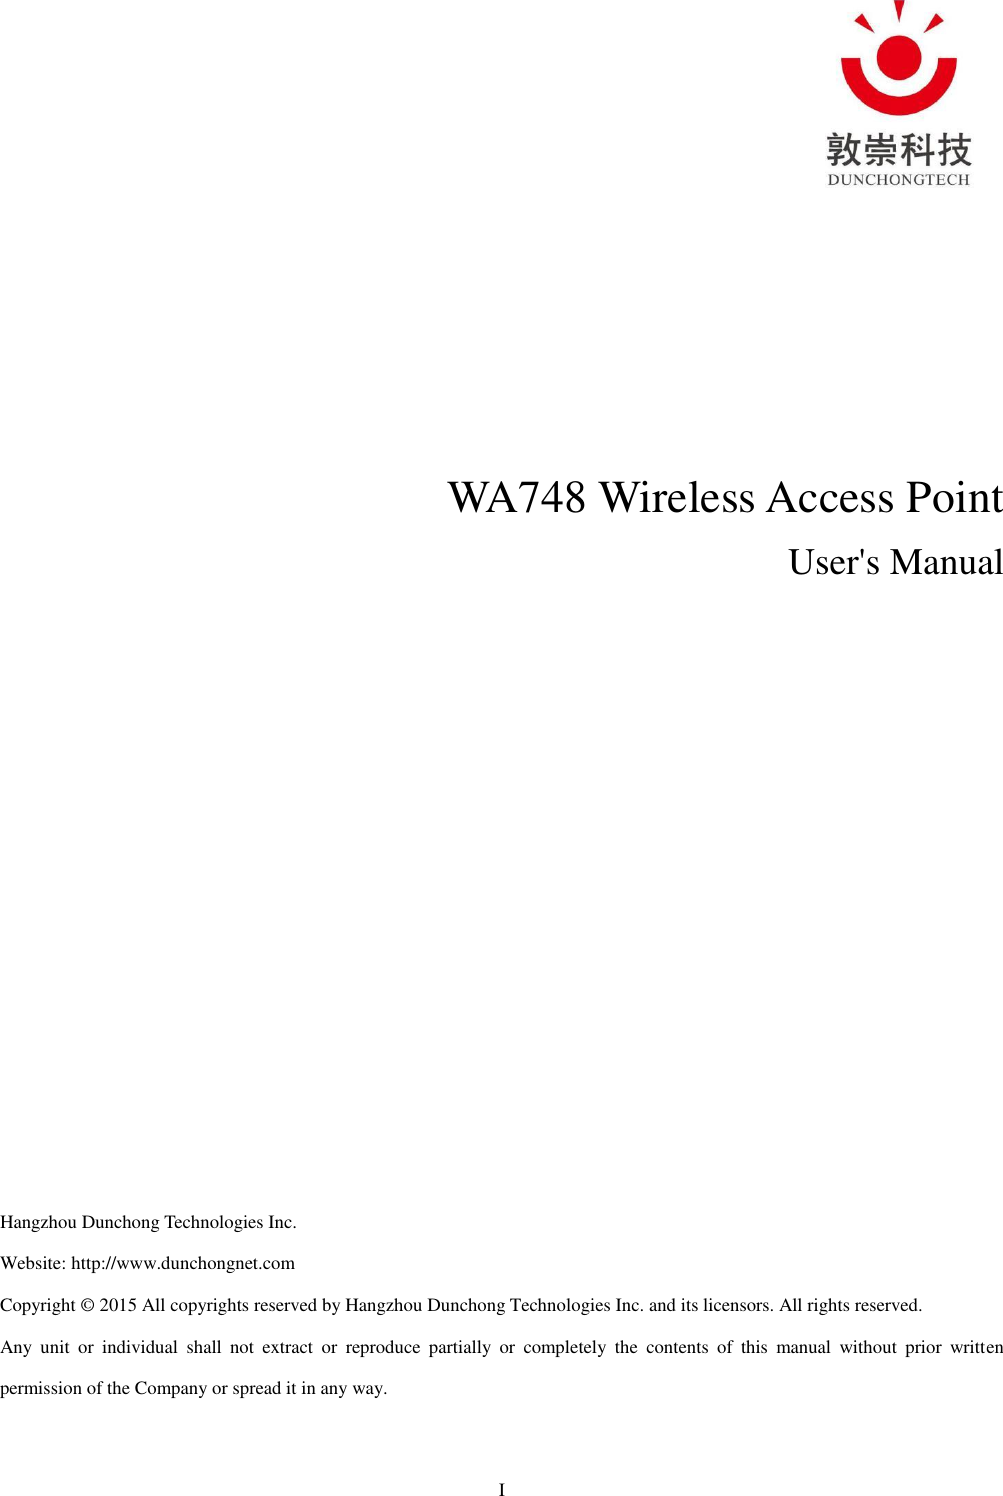 I      WA748 Wireless Access Point   User&apos;s Manual              Hangzhou Dunchong Technologies Inc.   Website: http://www.dunchongnet.com   Copyright © 2015 All copyrights reserved by Hangzhou Dunchong Technologies Inc. and its licensors. All rights reserved.     Any  unit  or  individual  shall  not  extract  or  reproduce  partially  or  completely  the  contents  of  this  manual  without  prior  written permission of the Company or spread it in any way.   